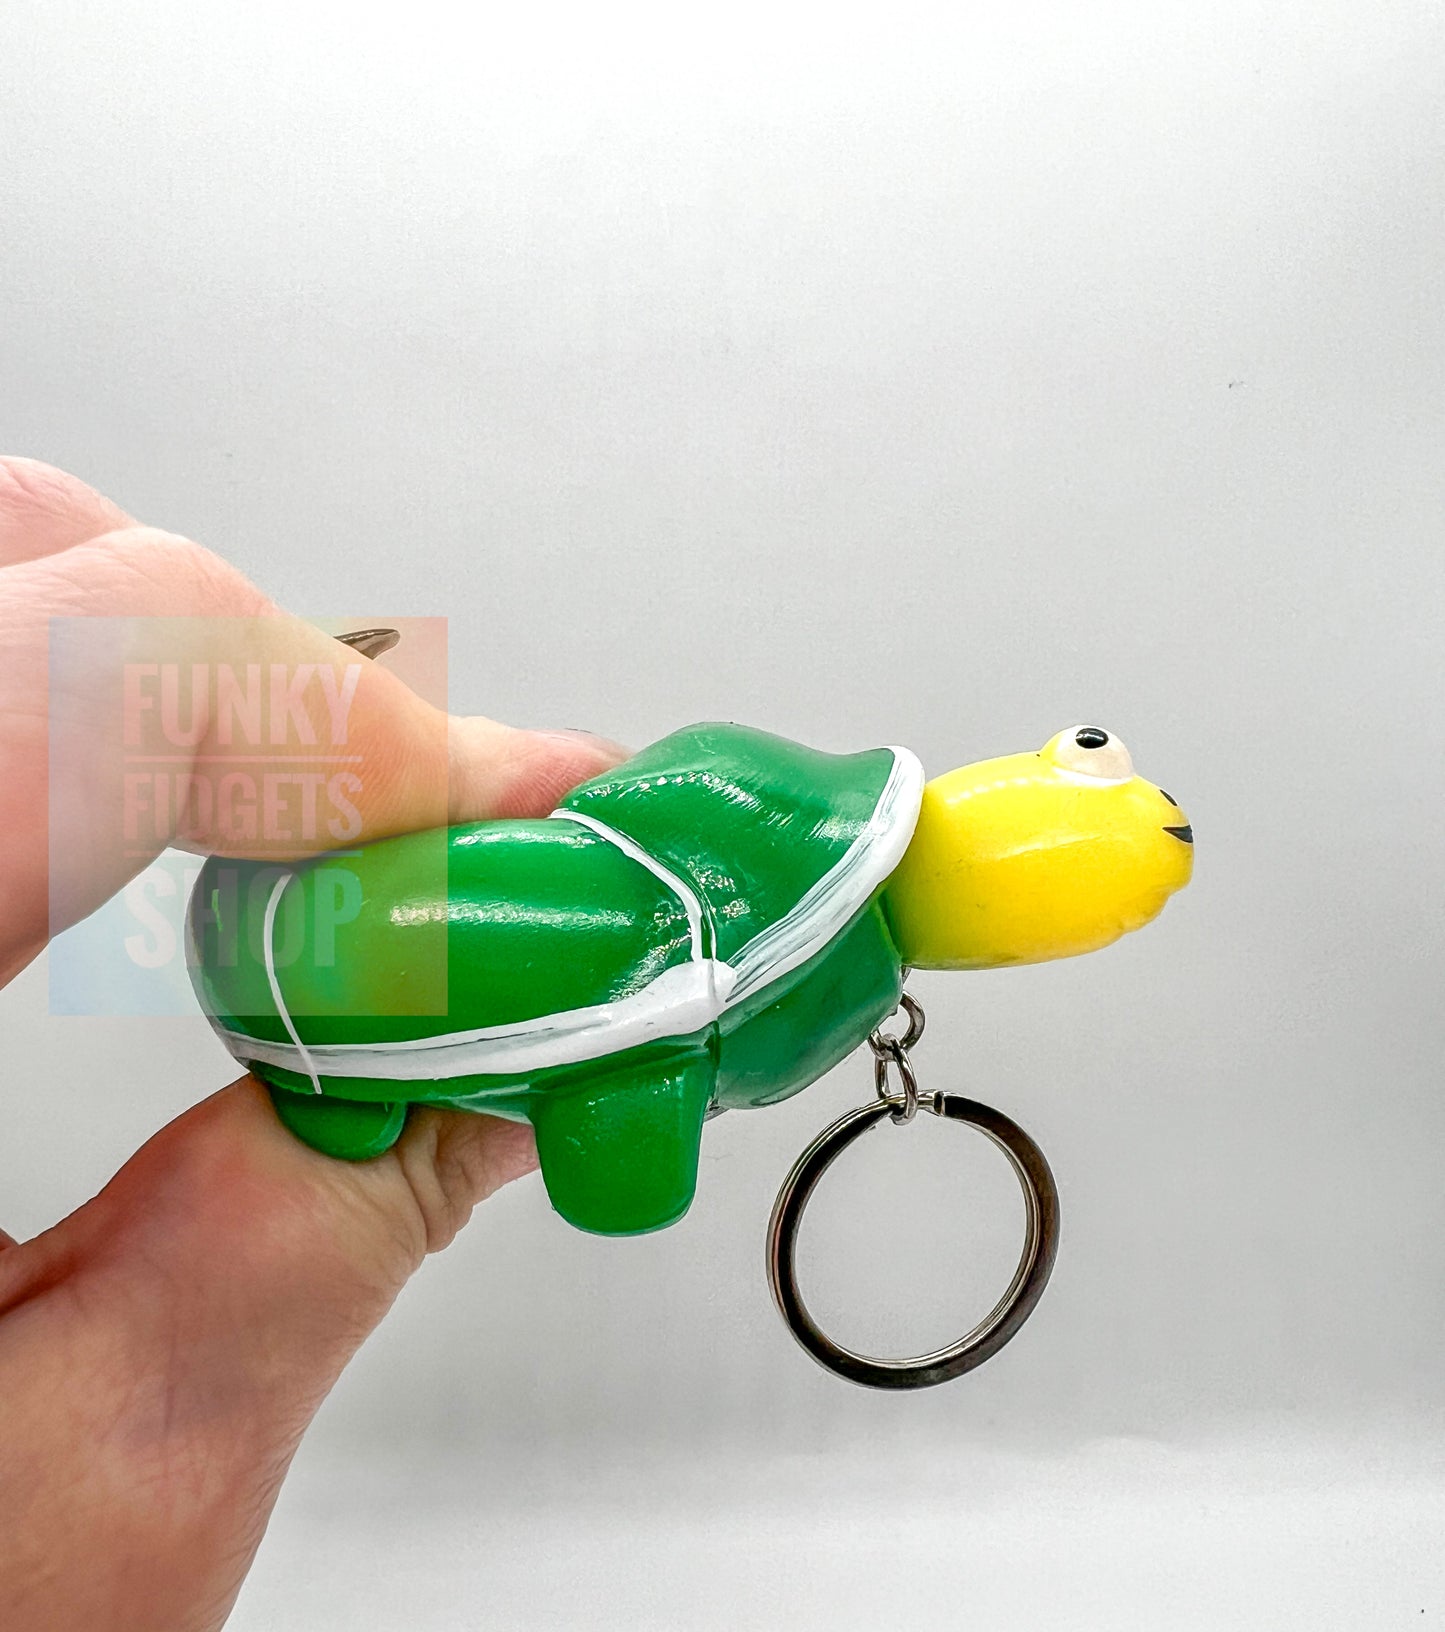 Pop out Turtle keychain